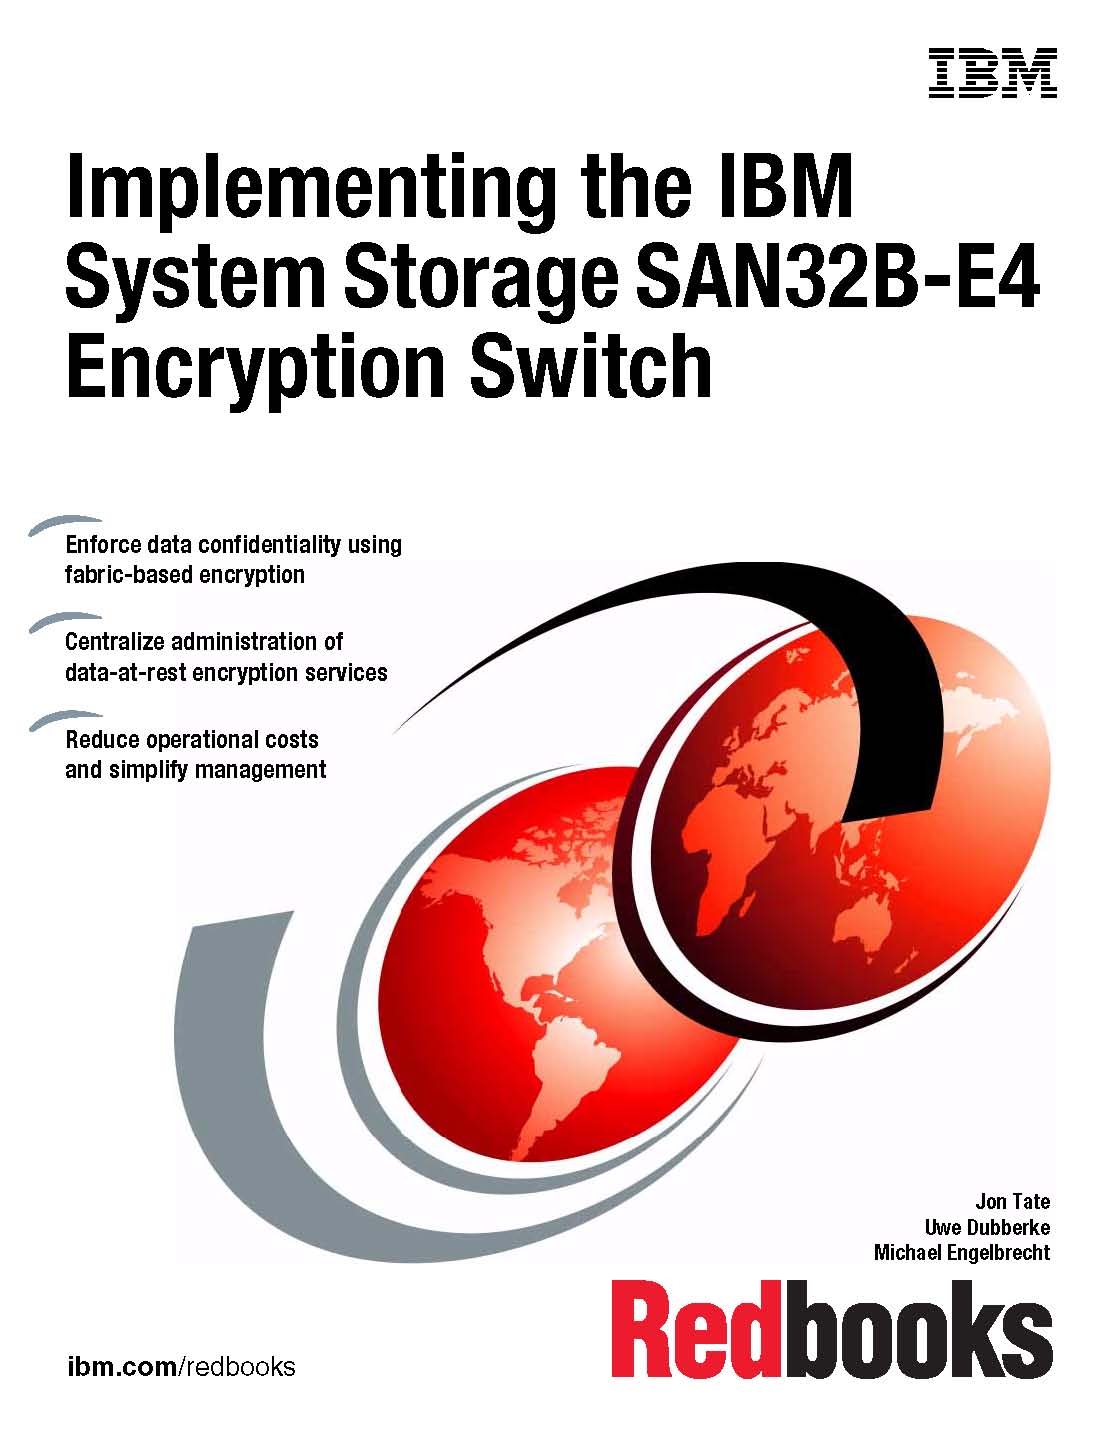 Implementing the IBM System Storage SAN32B-E4 Encryption Switch